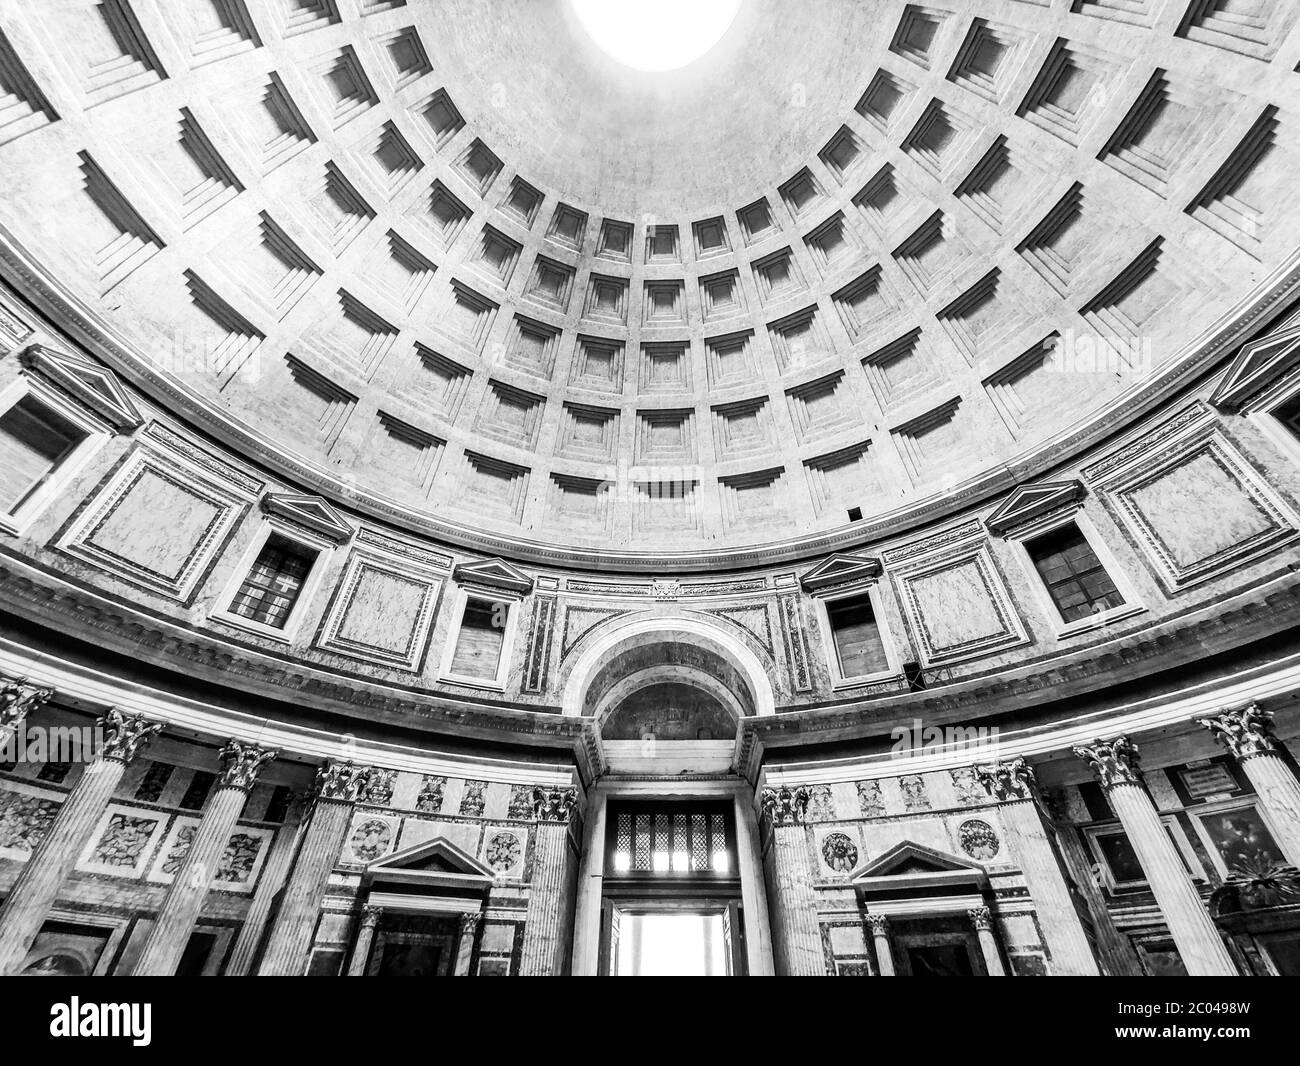 ROME, ITALY - MAY 05, 2019: Monumental ceiling of Pantheon - church and former Roman temple, Rome, Italy. Black and white image. Stock Photo